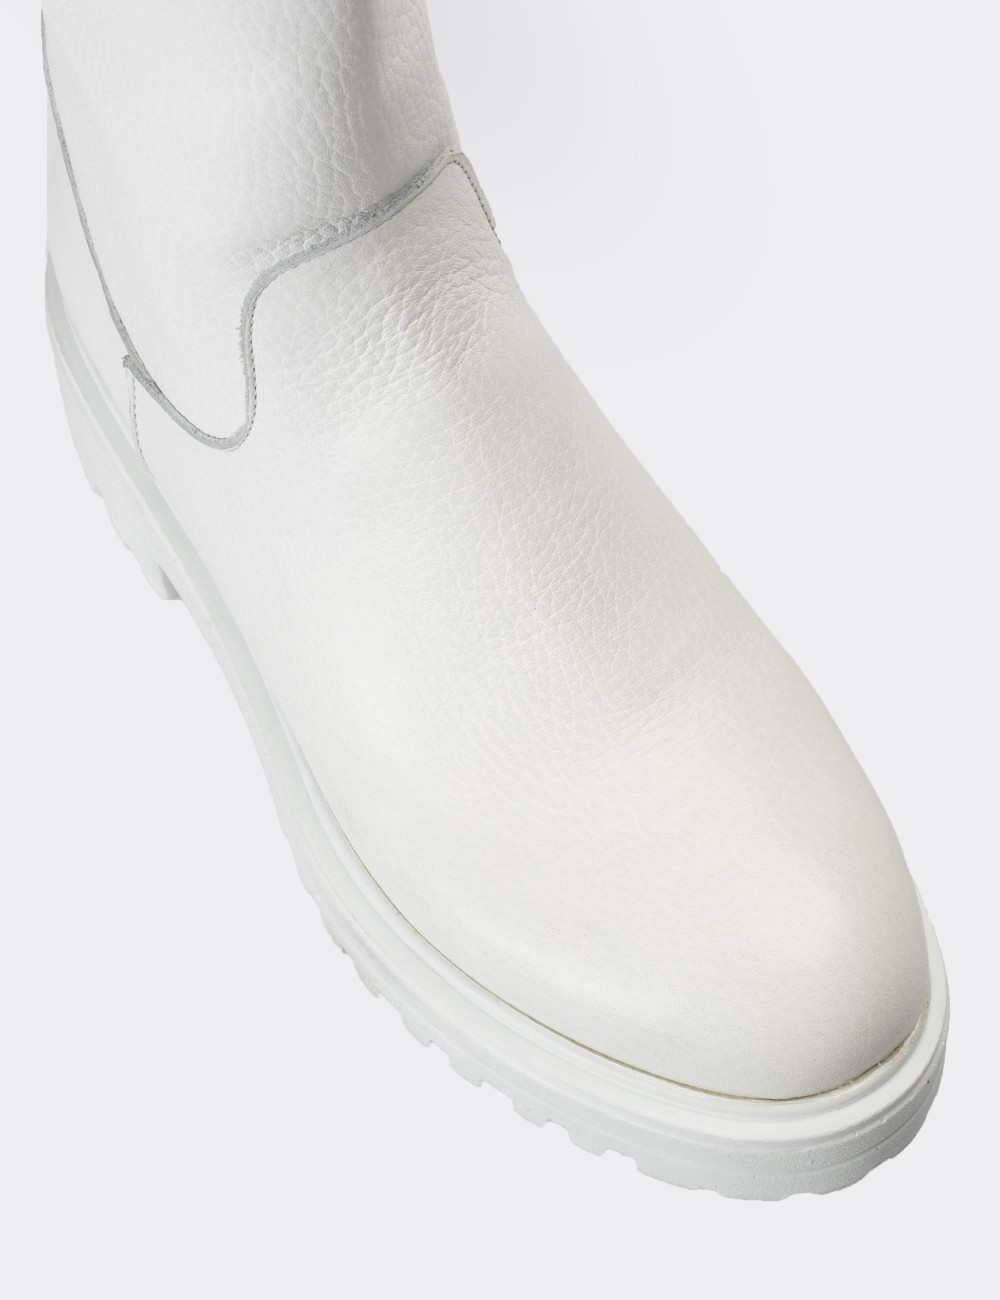 White  Leather Boots - 01807ZBYZE01